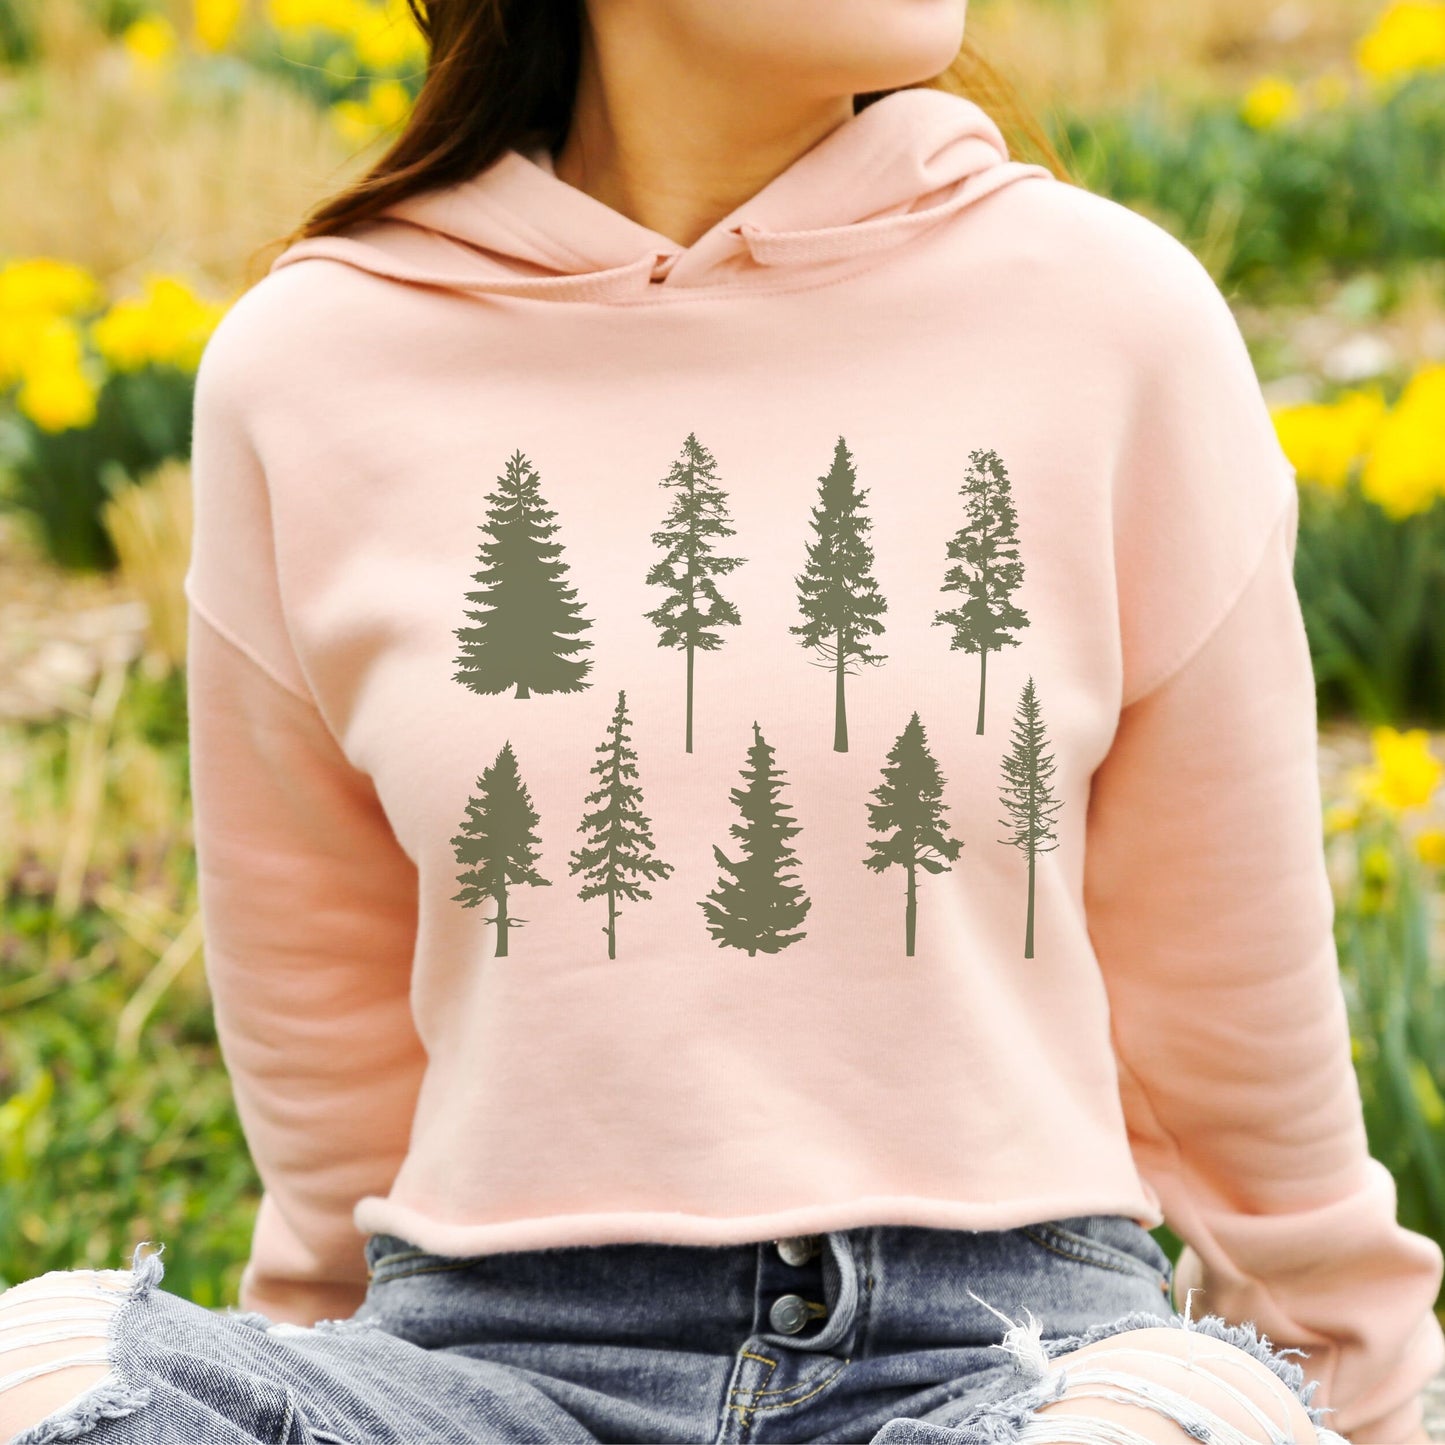 Forest Trees Silhouette Cropped Hoodie Granola Girl Aesthetic Nature Hoodie ForestCore Sweatshirt Outdoors Adventurer Cropped Shirt